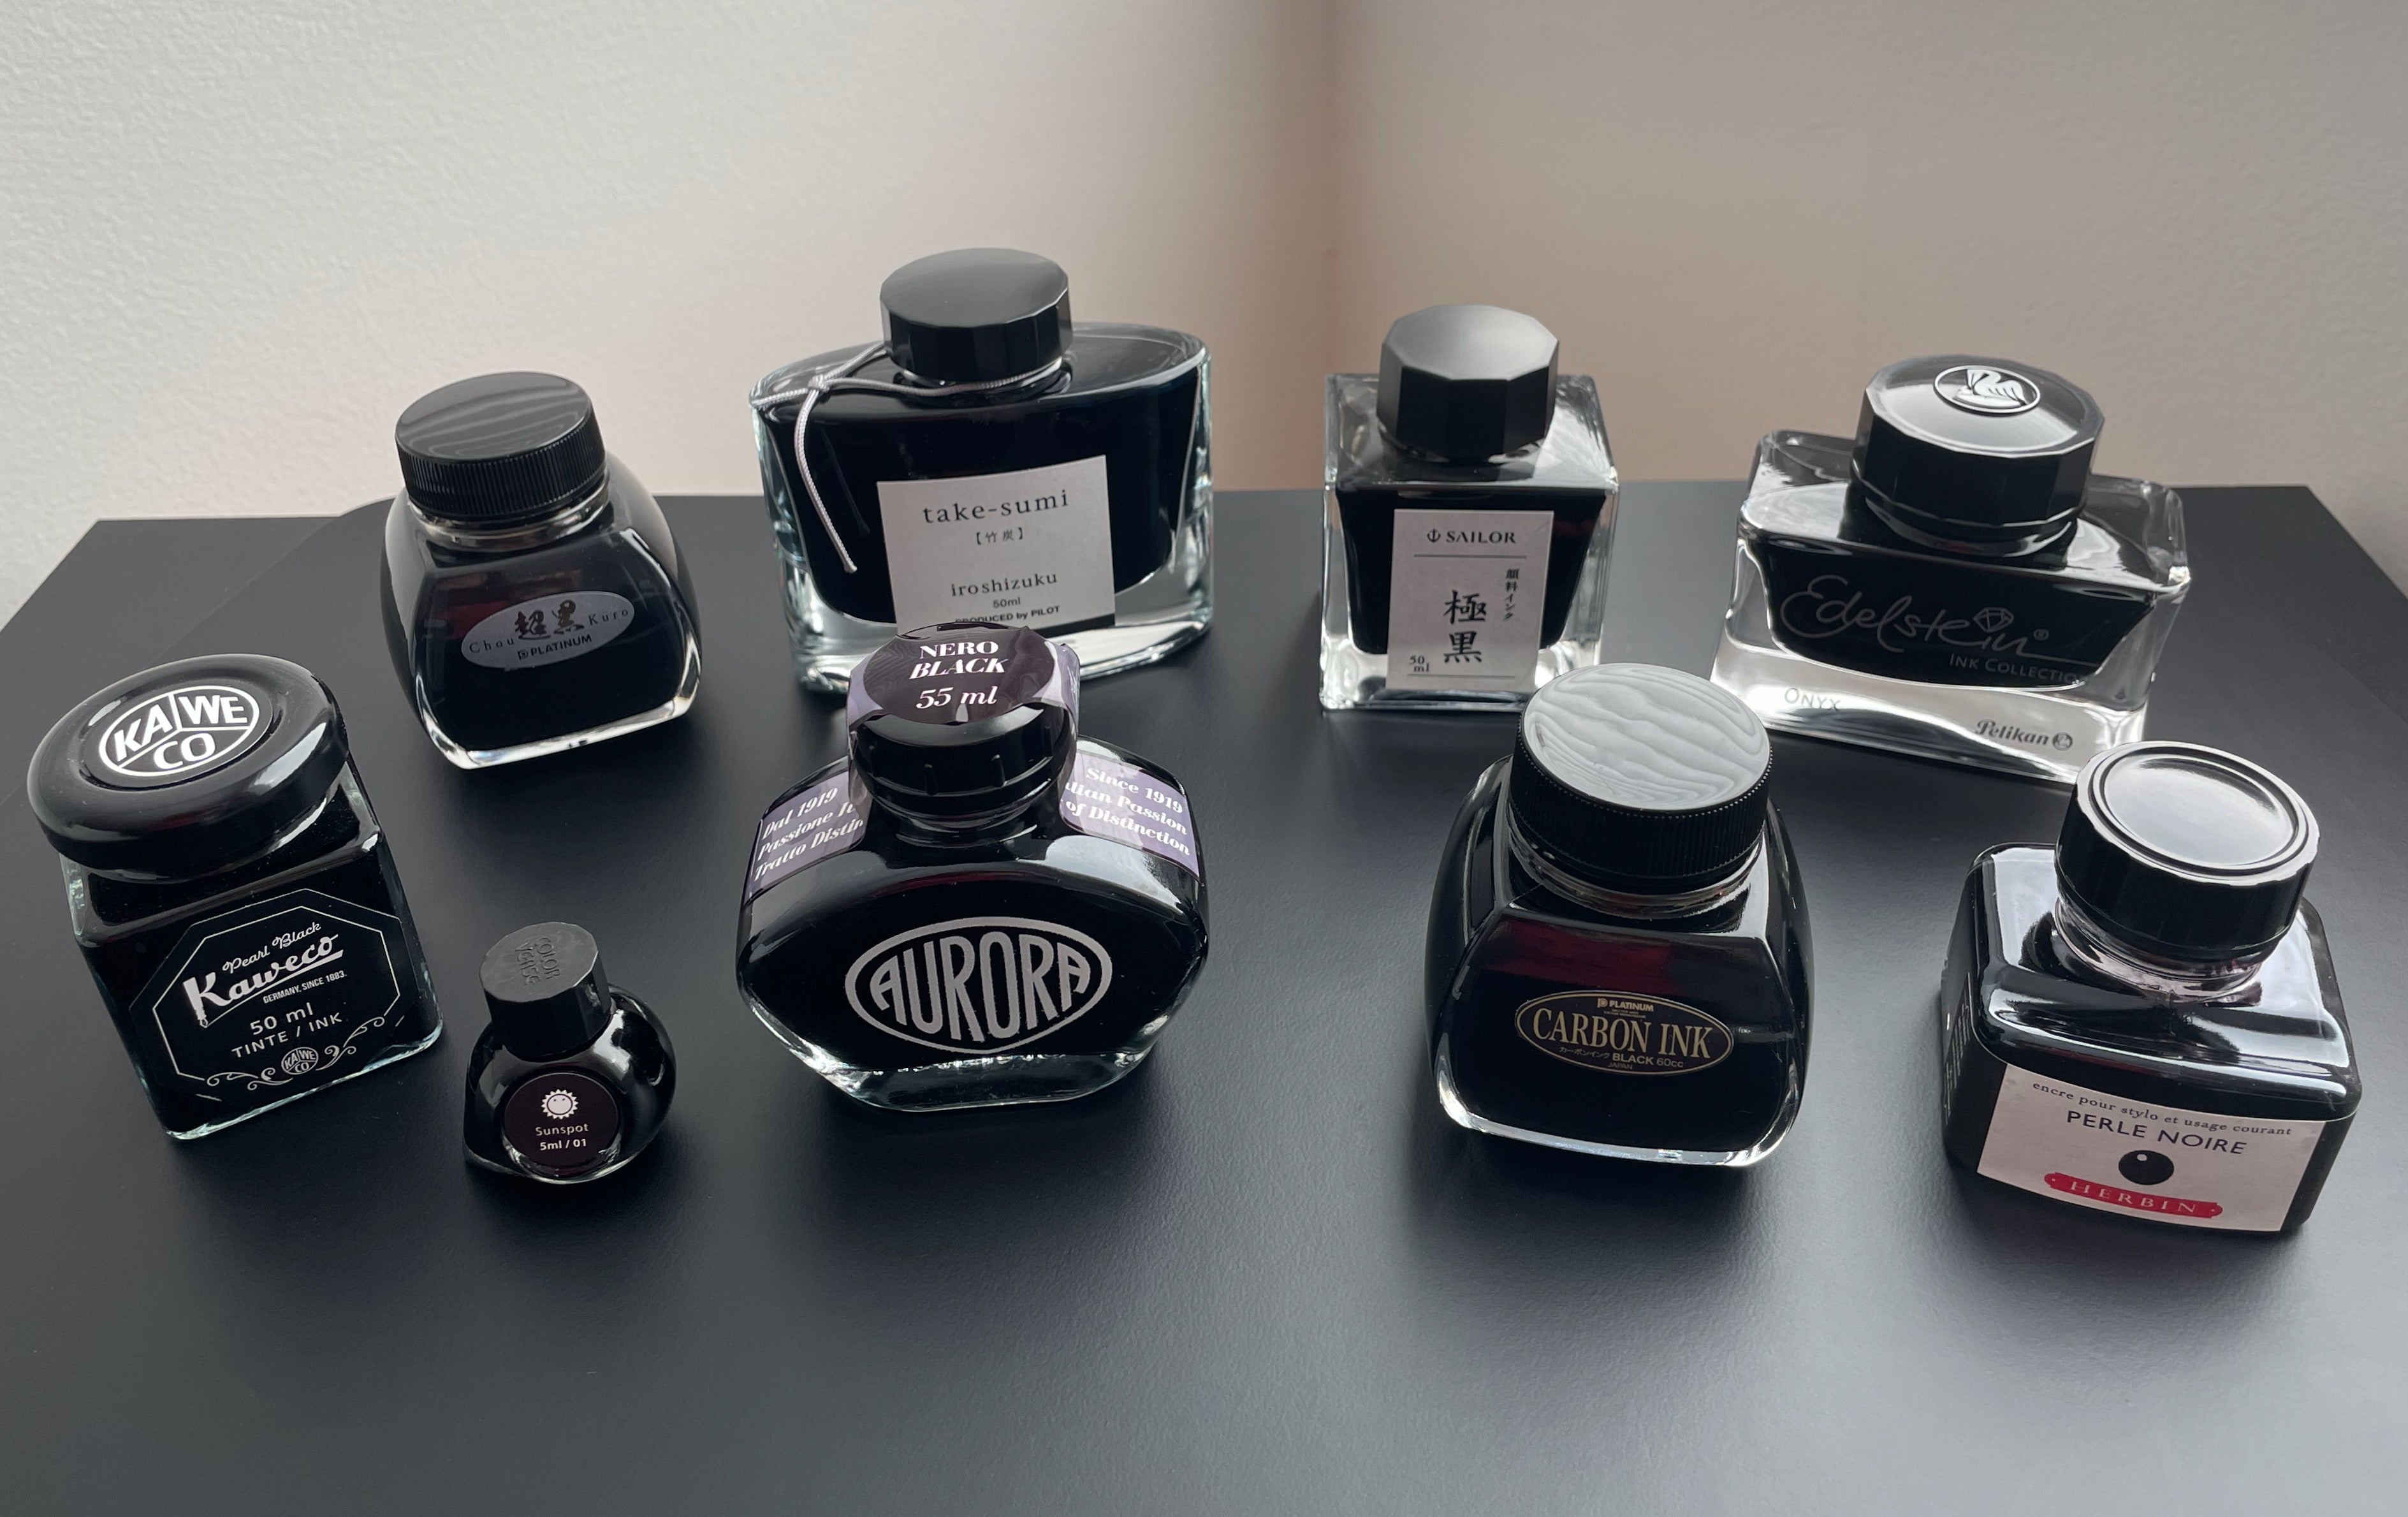 Is Pen Ink Bad for Your Skin? - Using Pen Ink on Your Skin